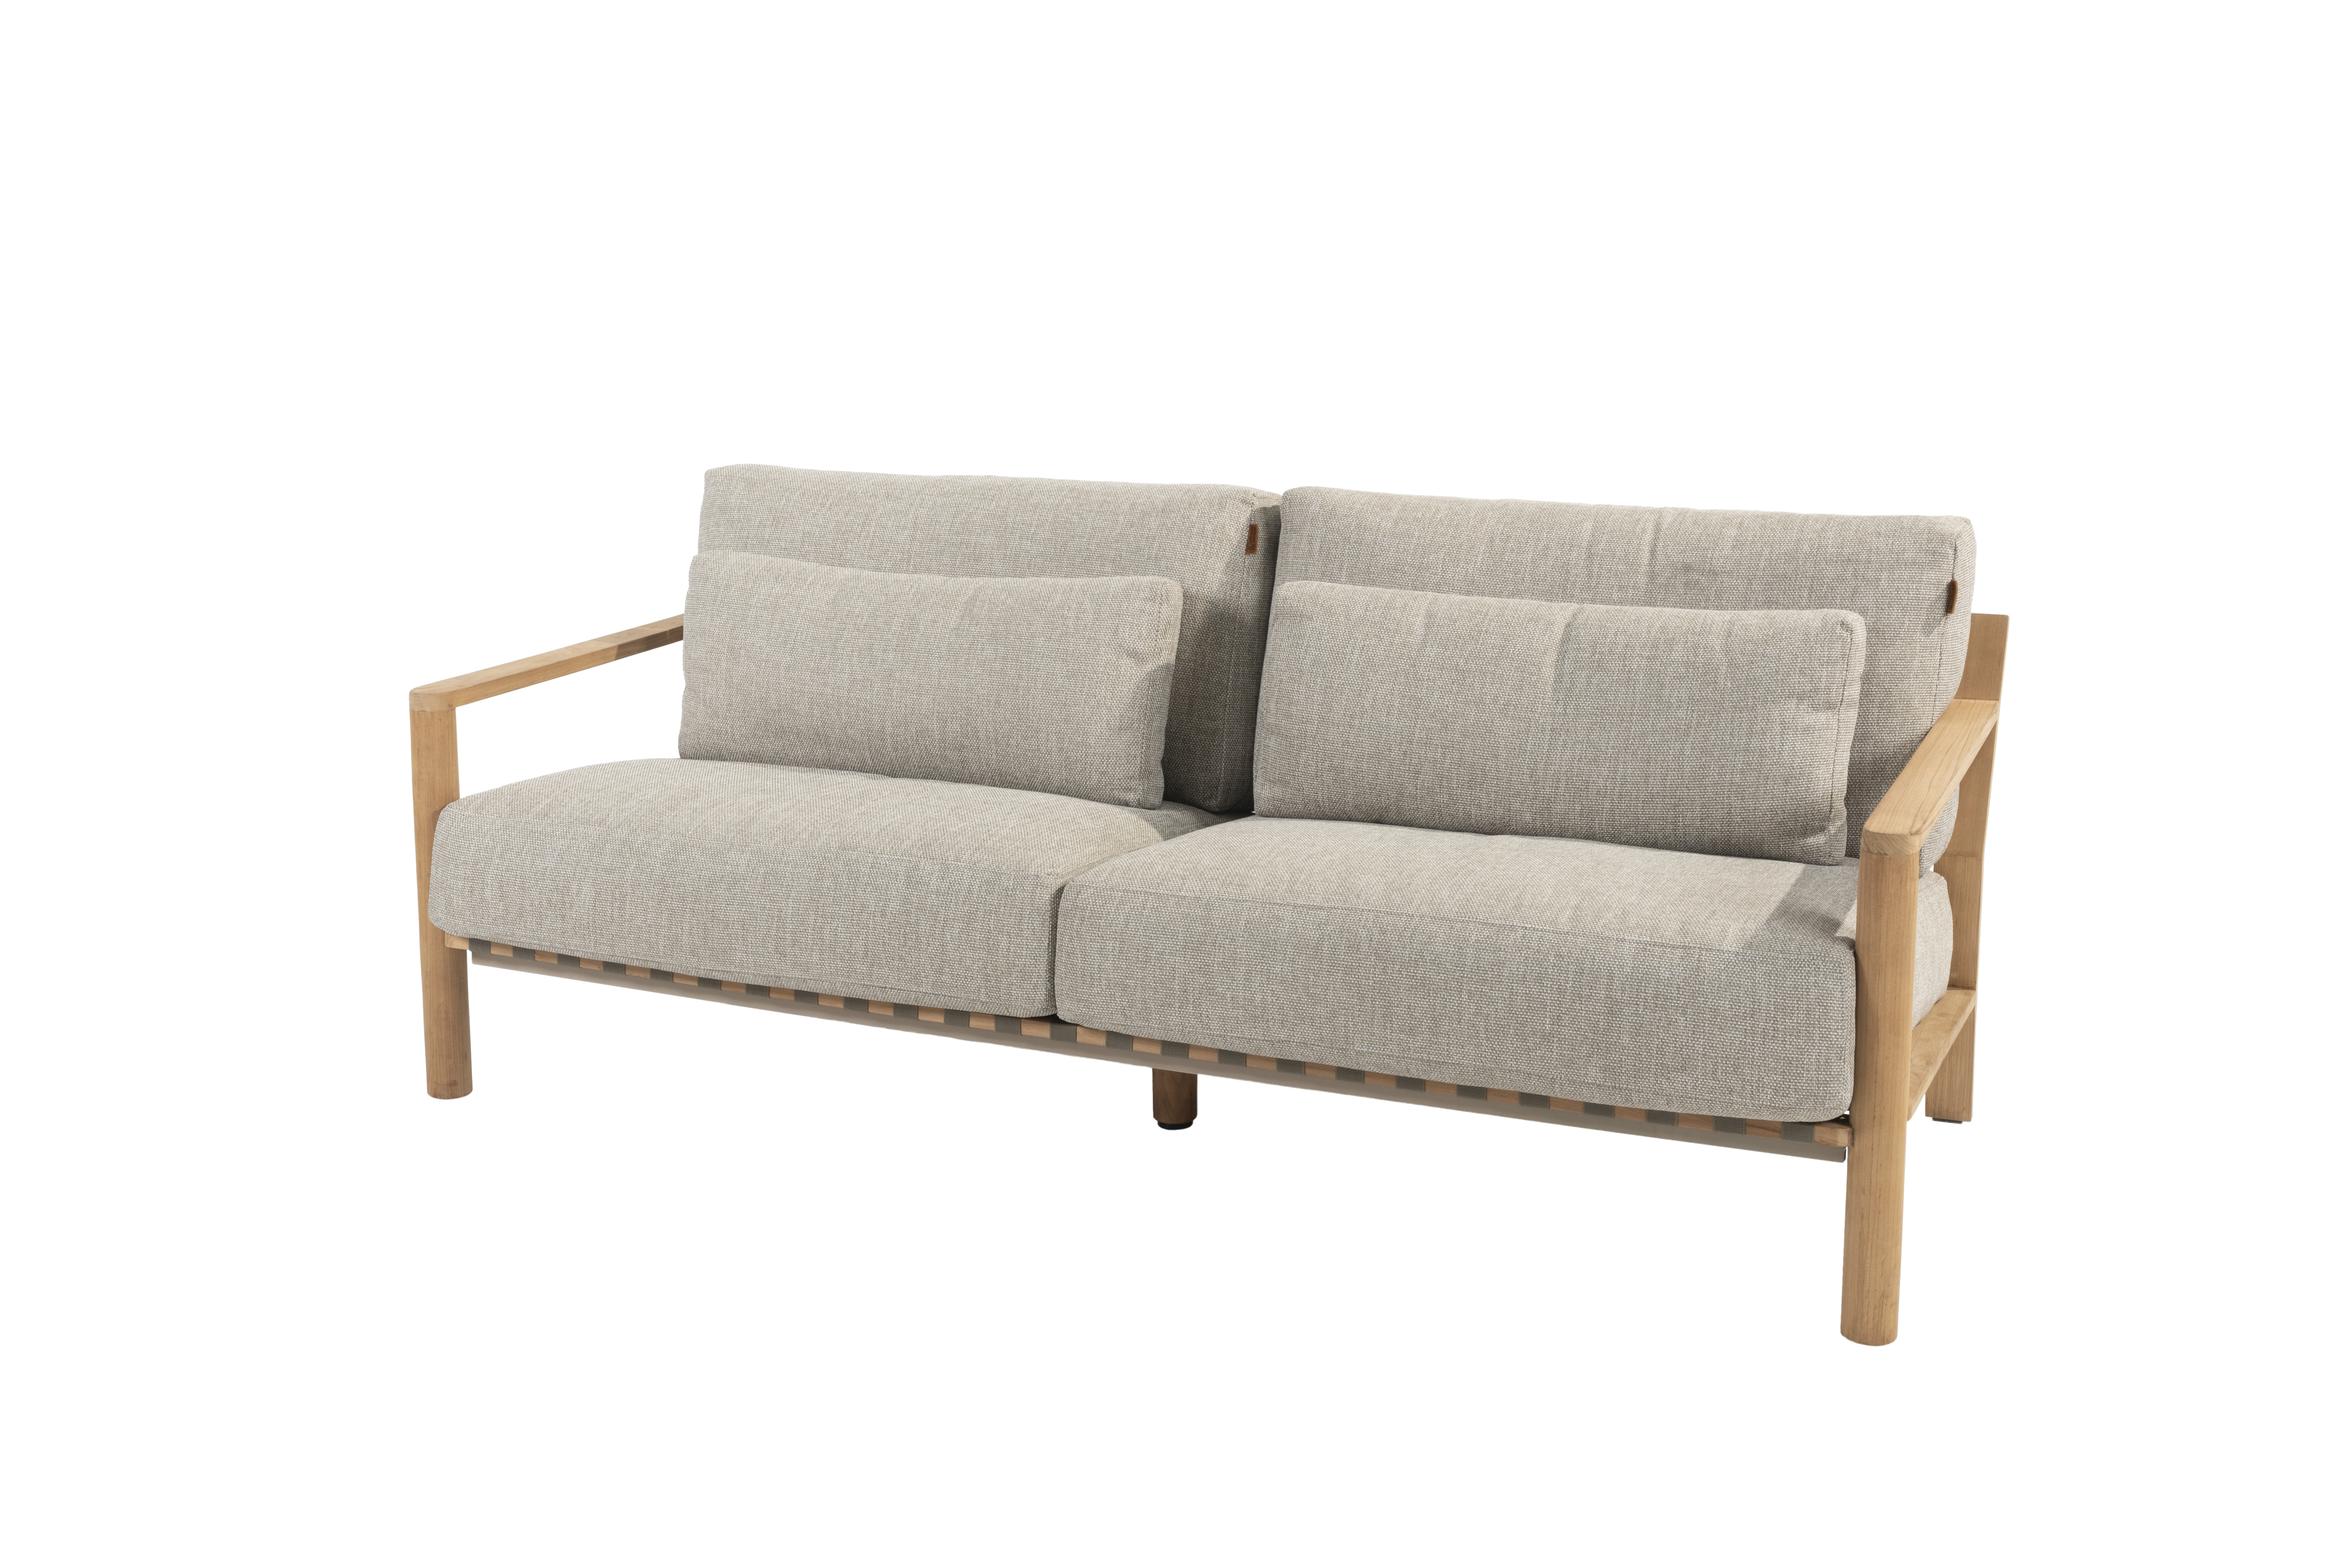 Lucas living bench natural teak with 6 cushions 